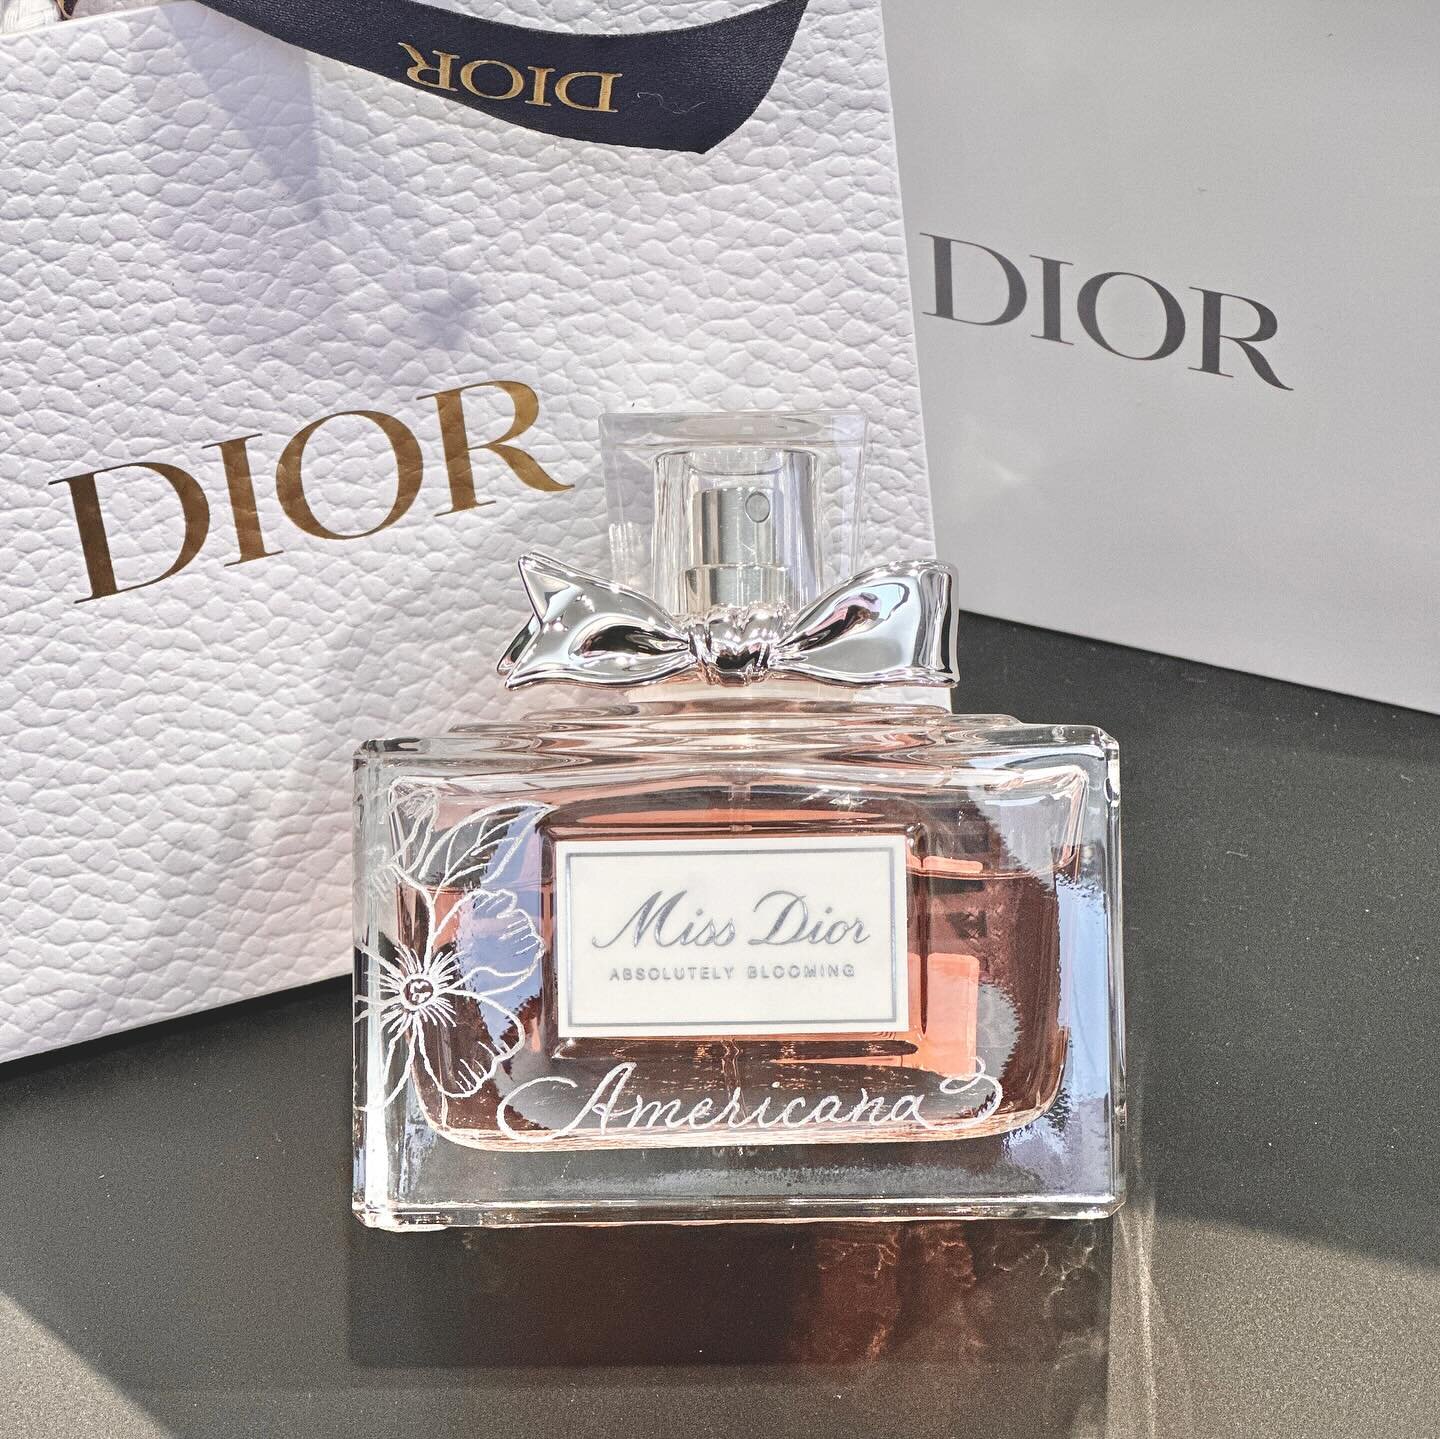 Thank you @diorbeauty for inviting me to be part of several activations for the launch of the new fragrance: Miss Dior Parfum (not pictured). 

#losangelesartist #losangelescalligraphy #eventartist #losangelescalligrapher #losangelesengraver #engravi